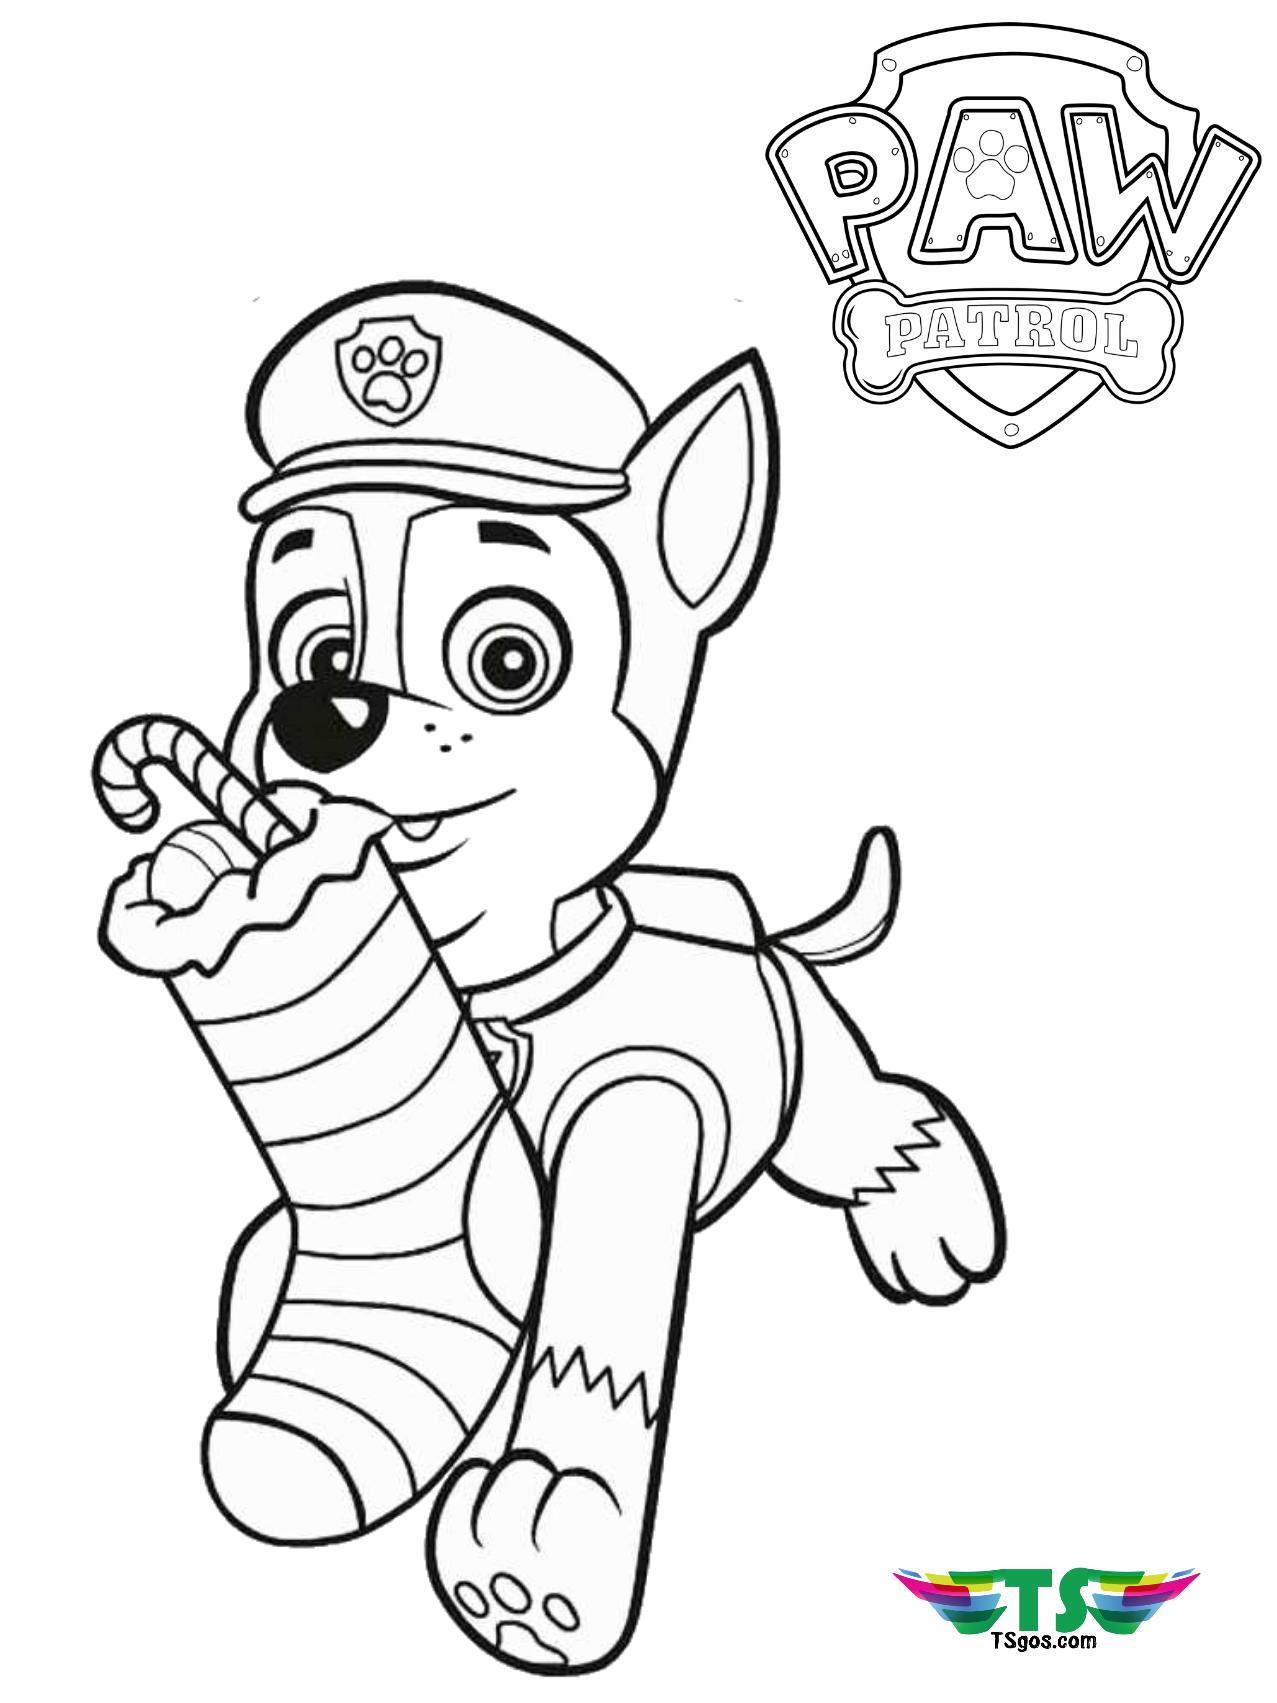 Paw Patrol Merry Christmas coloring page.